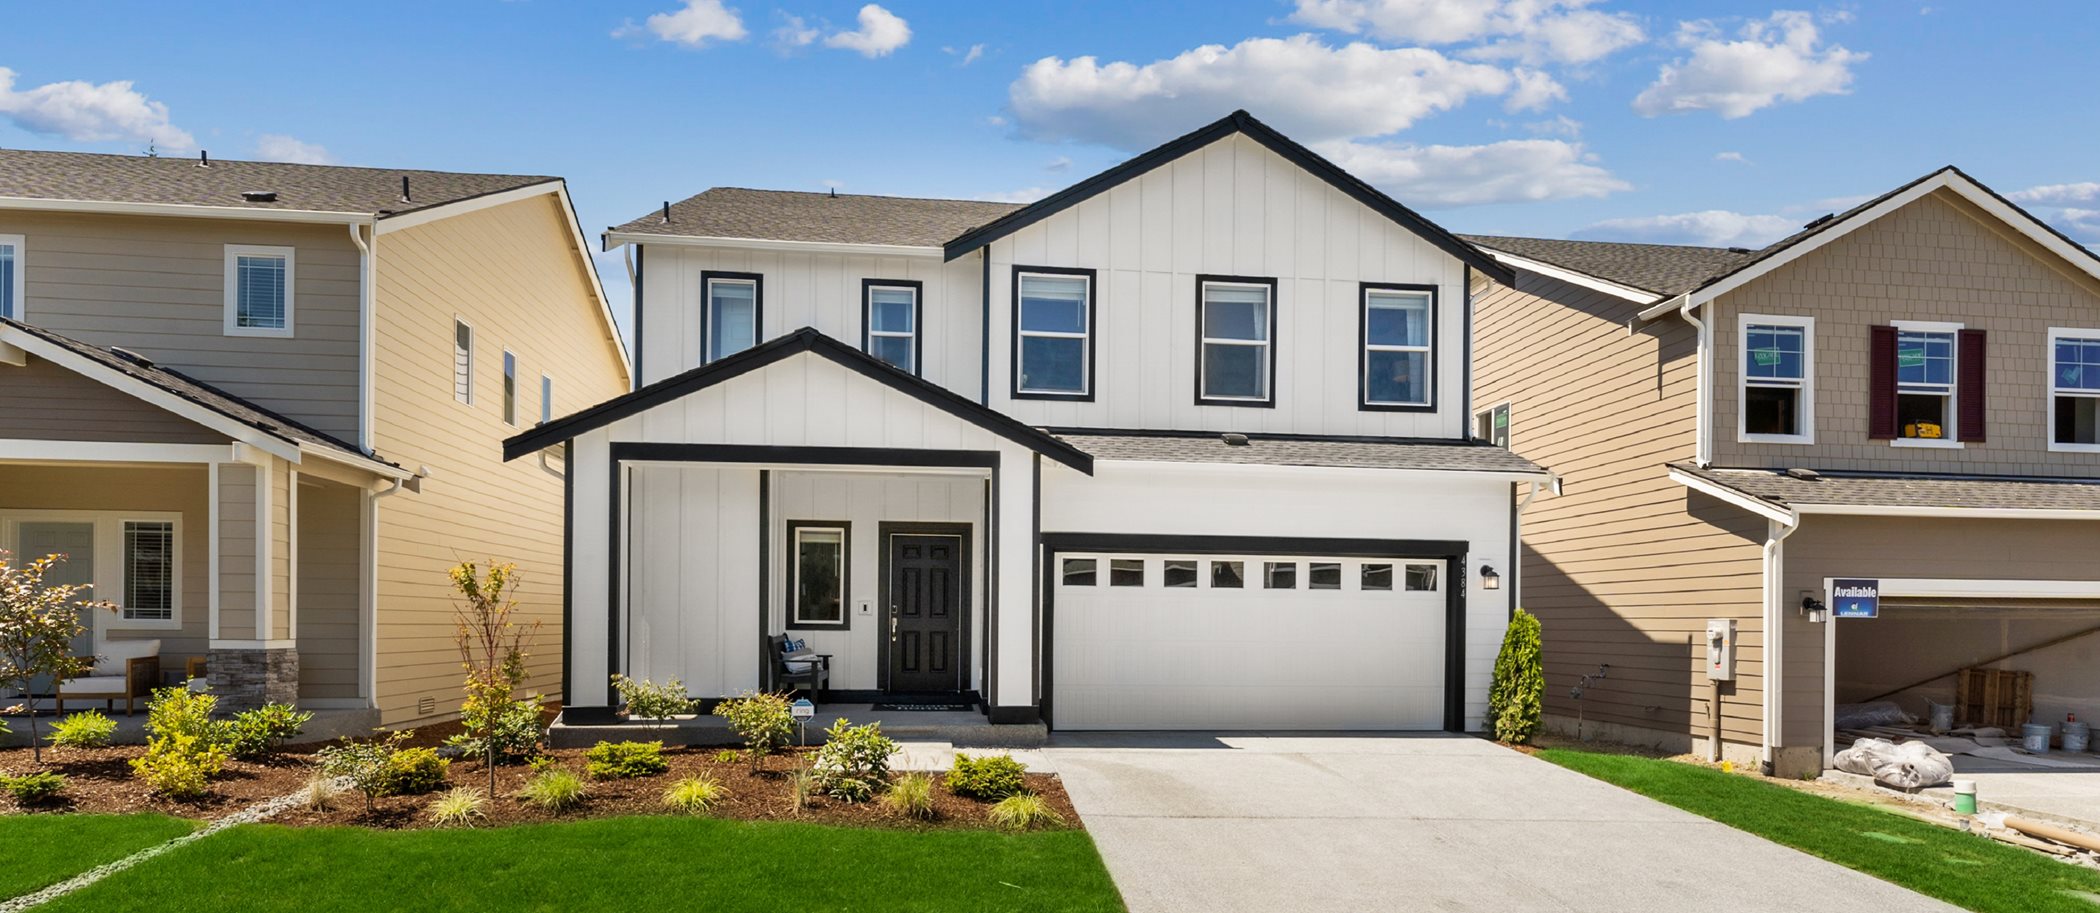 Kitsap County homes now selling move-in ready